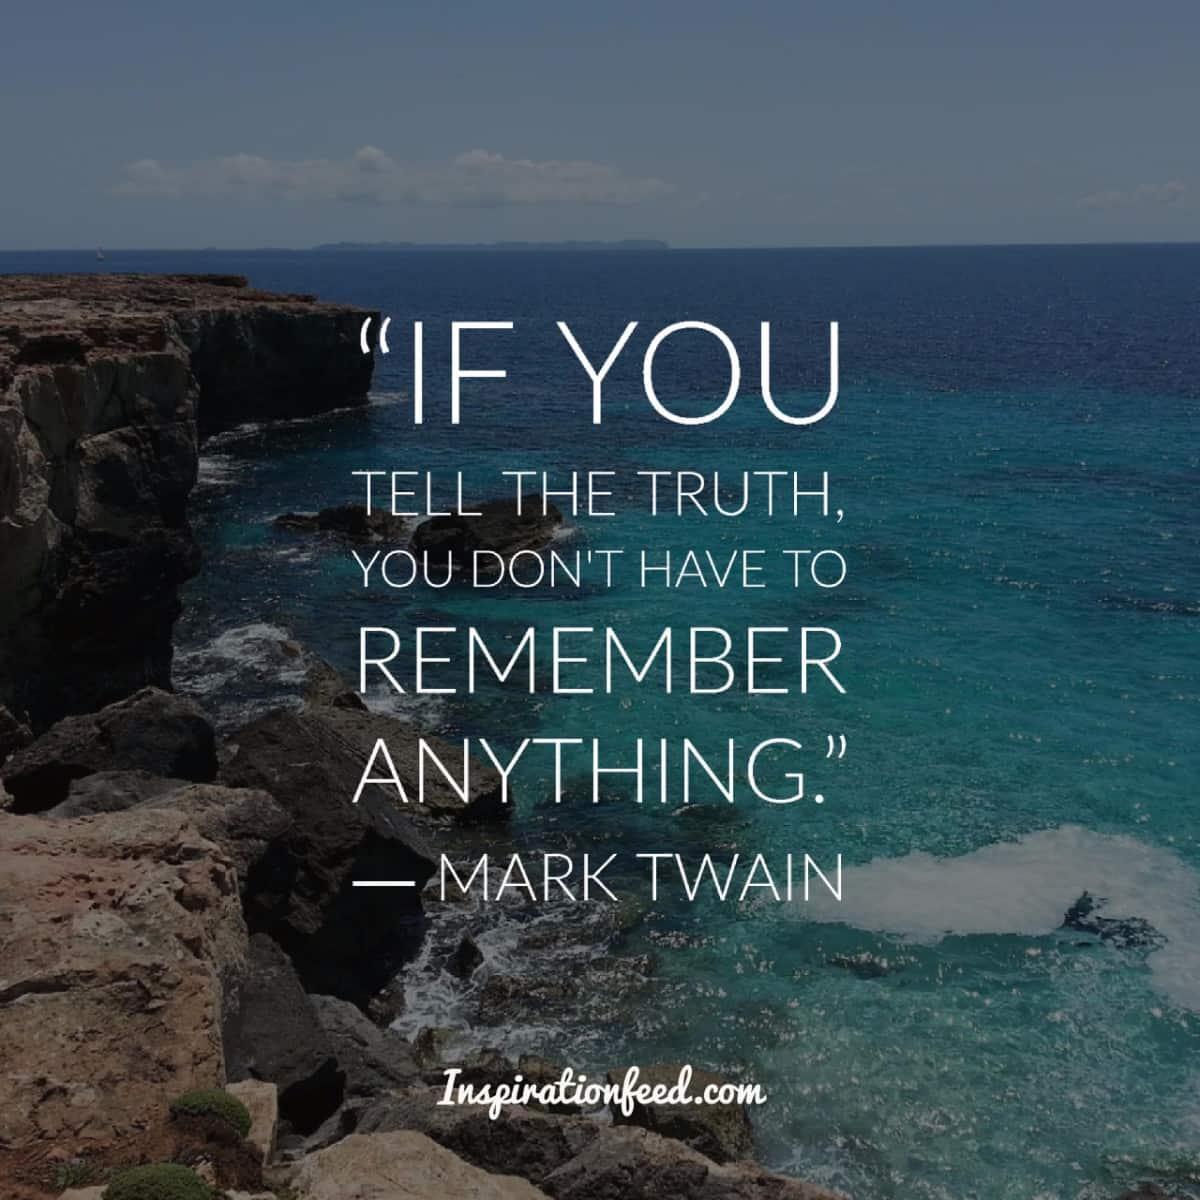 30 Mark Twain Quotes about Life and Writing | Inspirationfeed